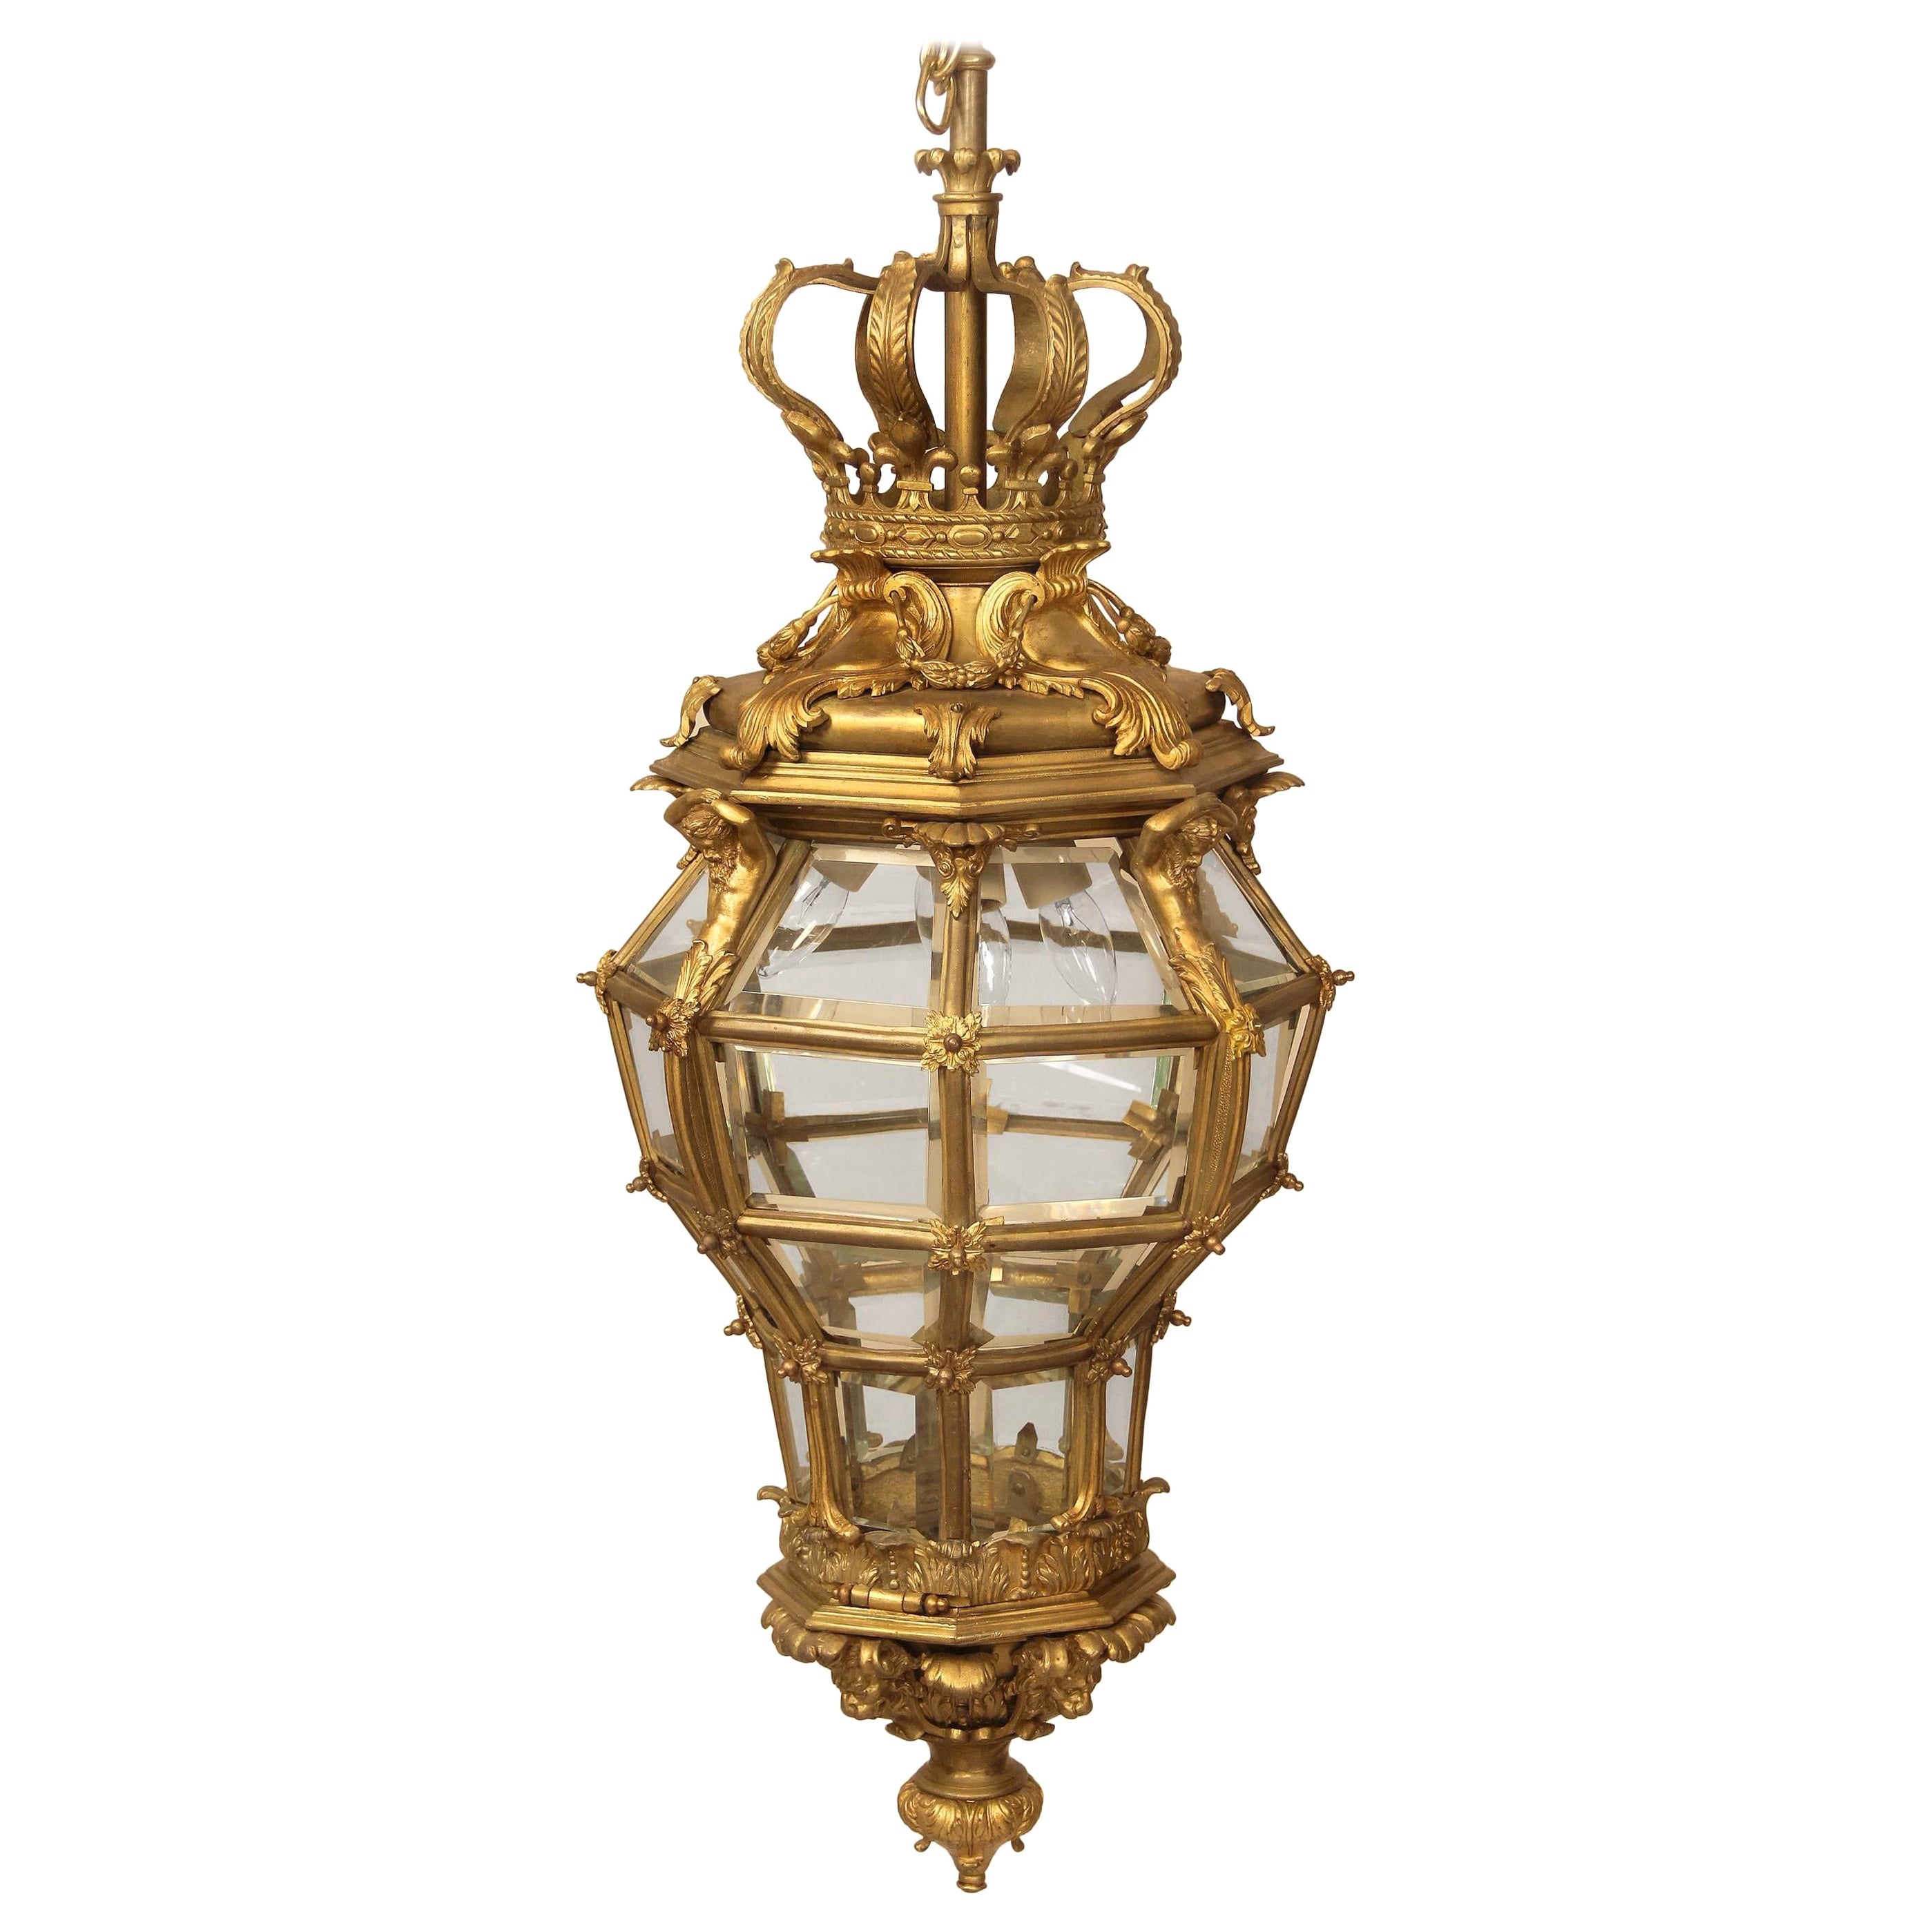 Fantastic Late 19th Century Gilt Bronze and Glass 'Versailles' Hall Lantern For Sale